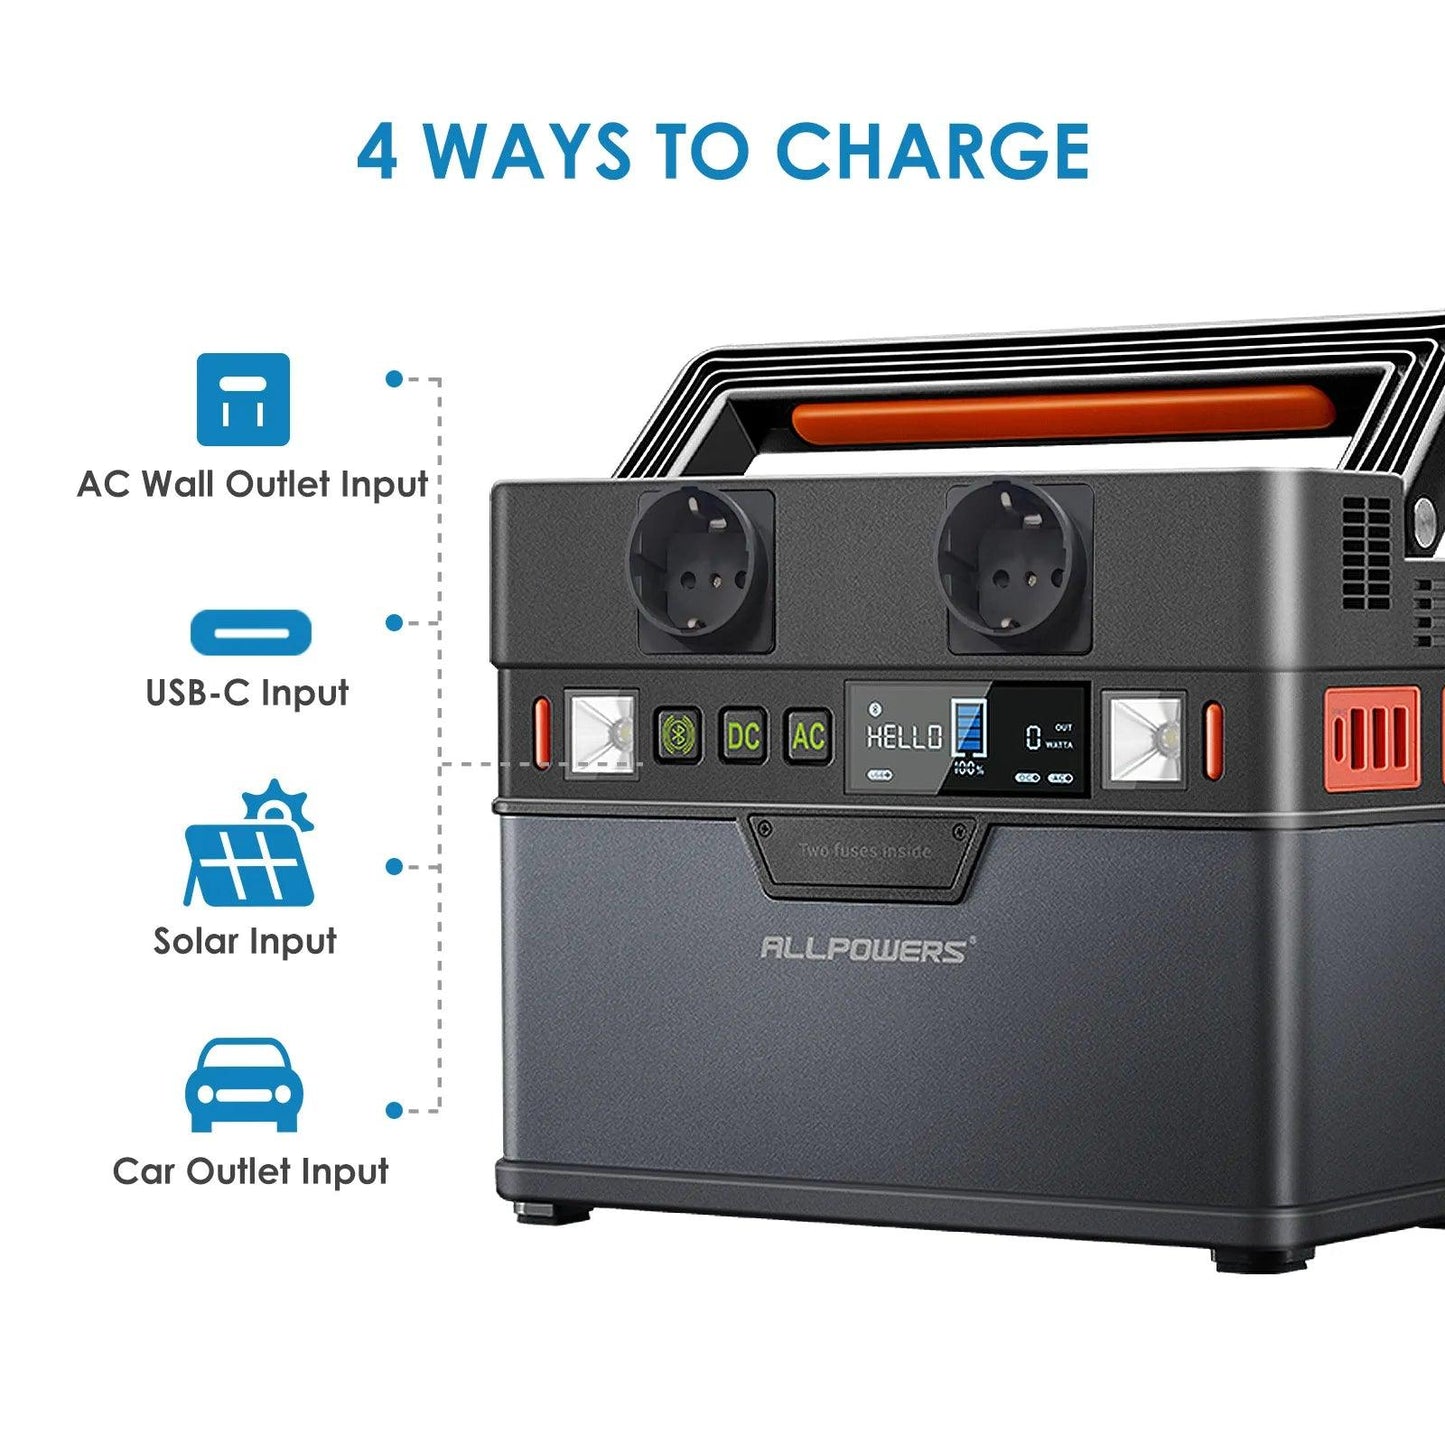 ALLPOWERS S300 Portable Power Station 300W - Inverted Powers